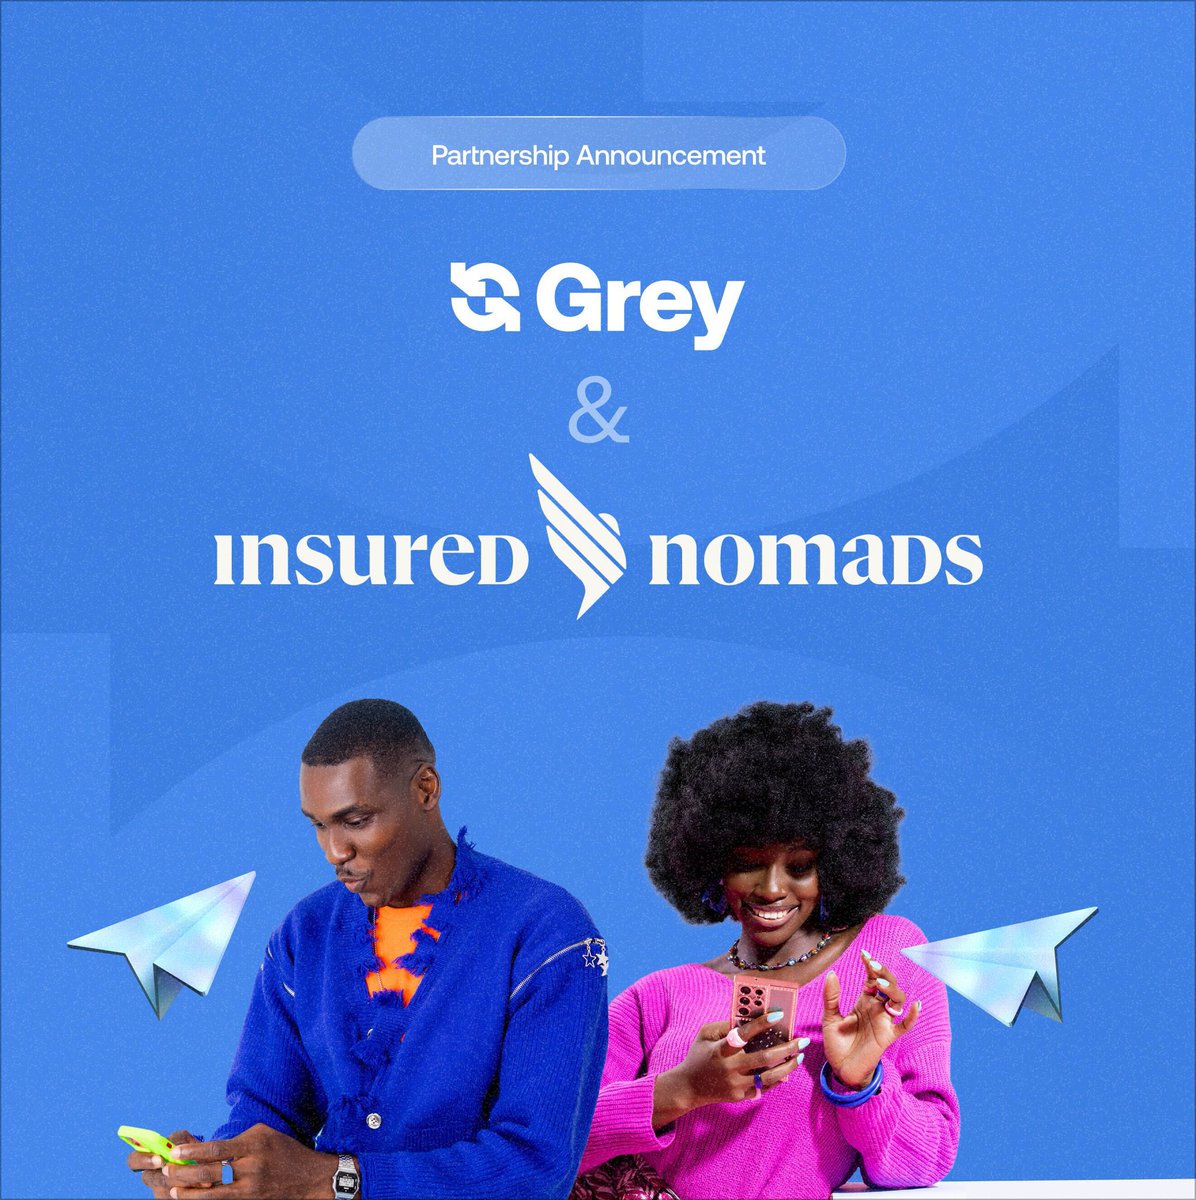 Your global adventures just got safer! ✈️⚕️

We’ve partnered with @greyfinance, to make remote work and travel safer and more convenient for their community around the world 🌍 protecting those with accounts🤝 !

#GoWithGrey as #InsuredNomads